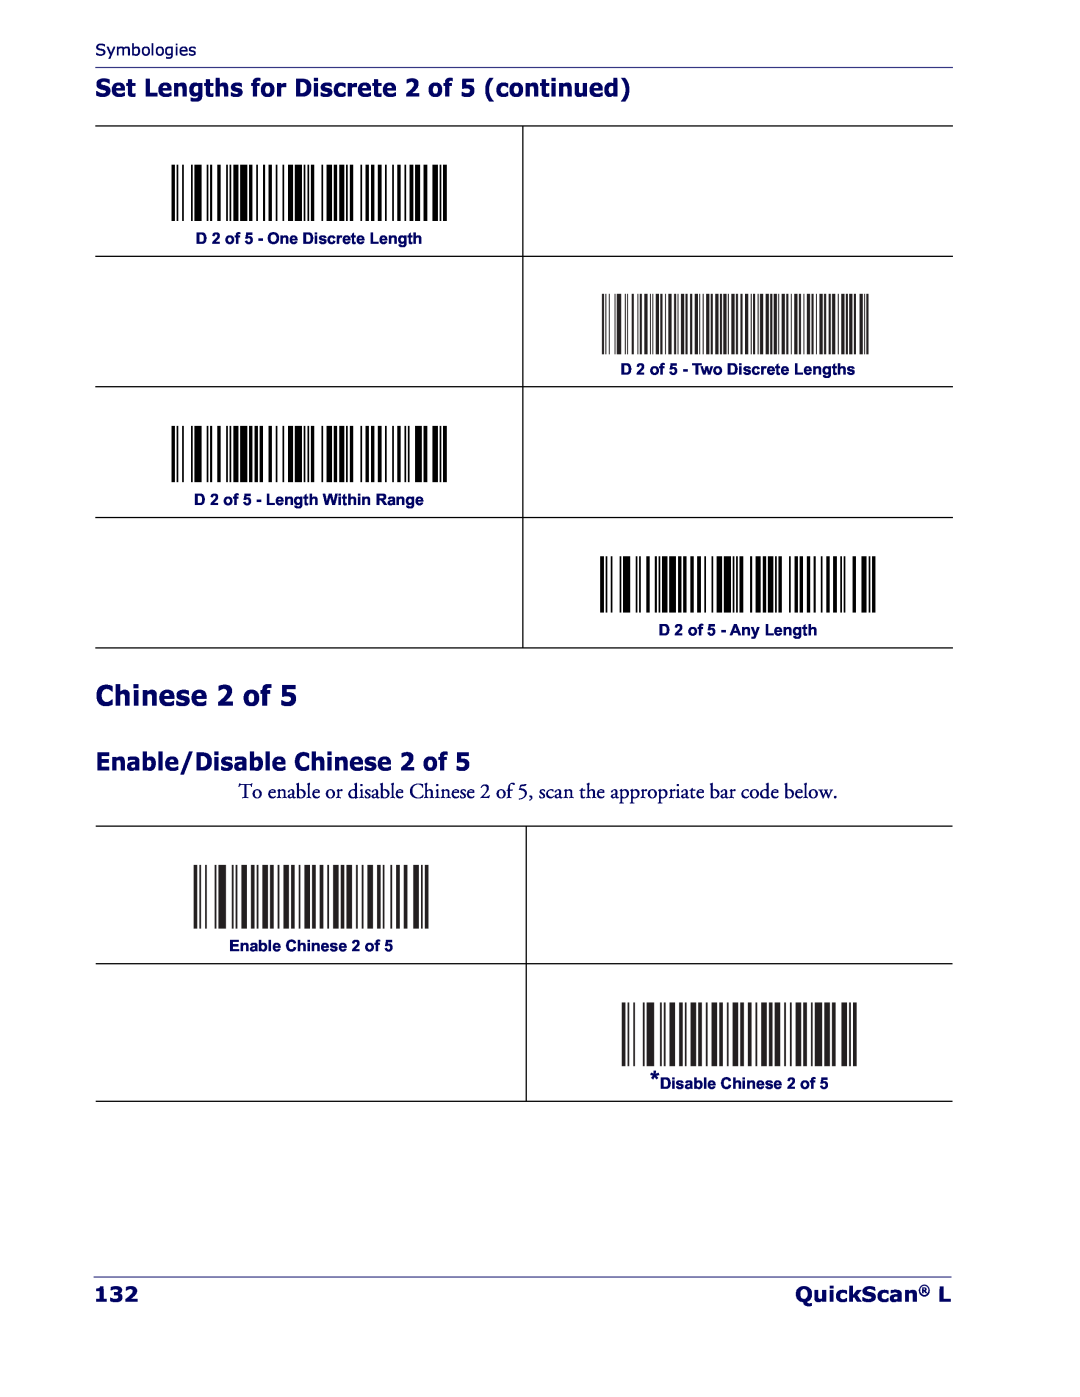 Datalogic Scanning QD 2300 manual Set Lengths for Discrete 2 of 5 continued, Enable/Disable Chinese 2 of, QuickScan L 